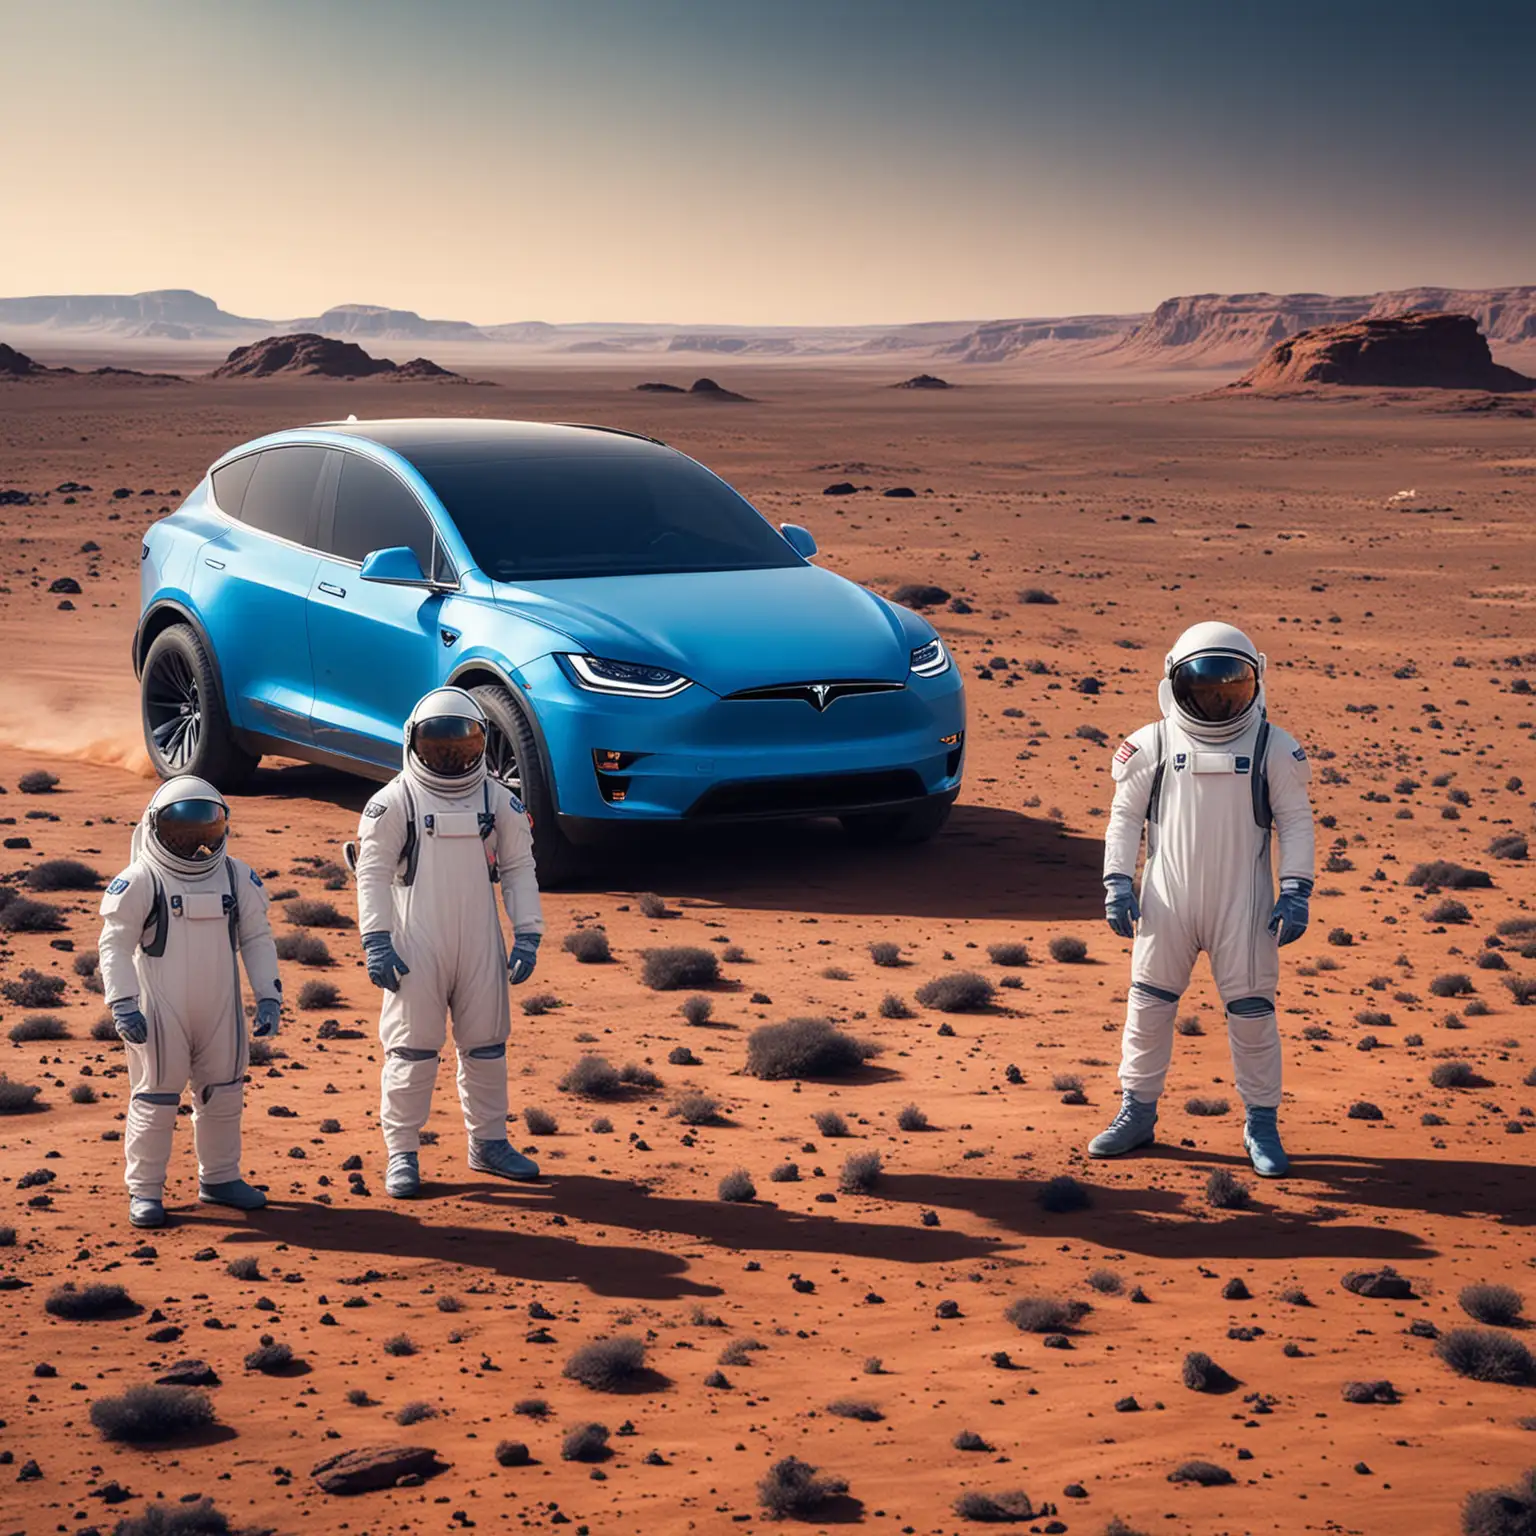 Exploring Mars Blue Tesla Y Model with Two Astronauts in White Robes